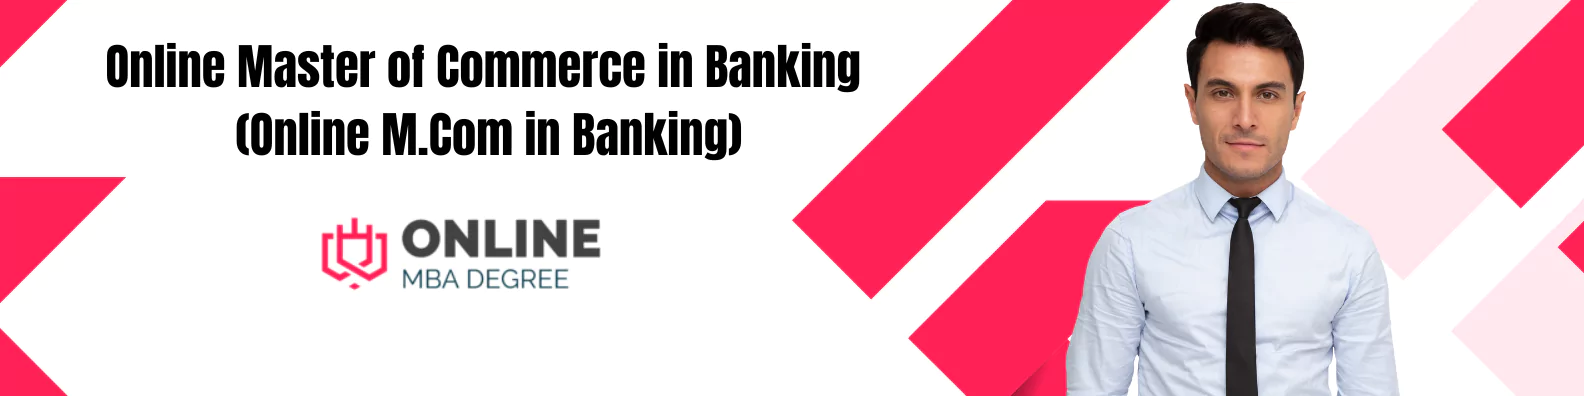 Online M.Com in Banking